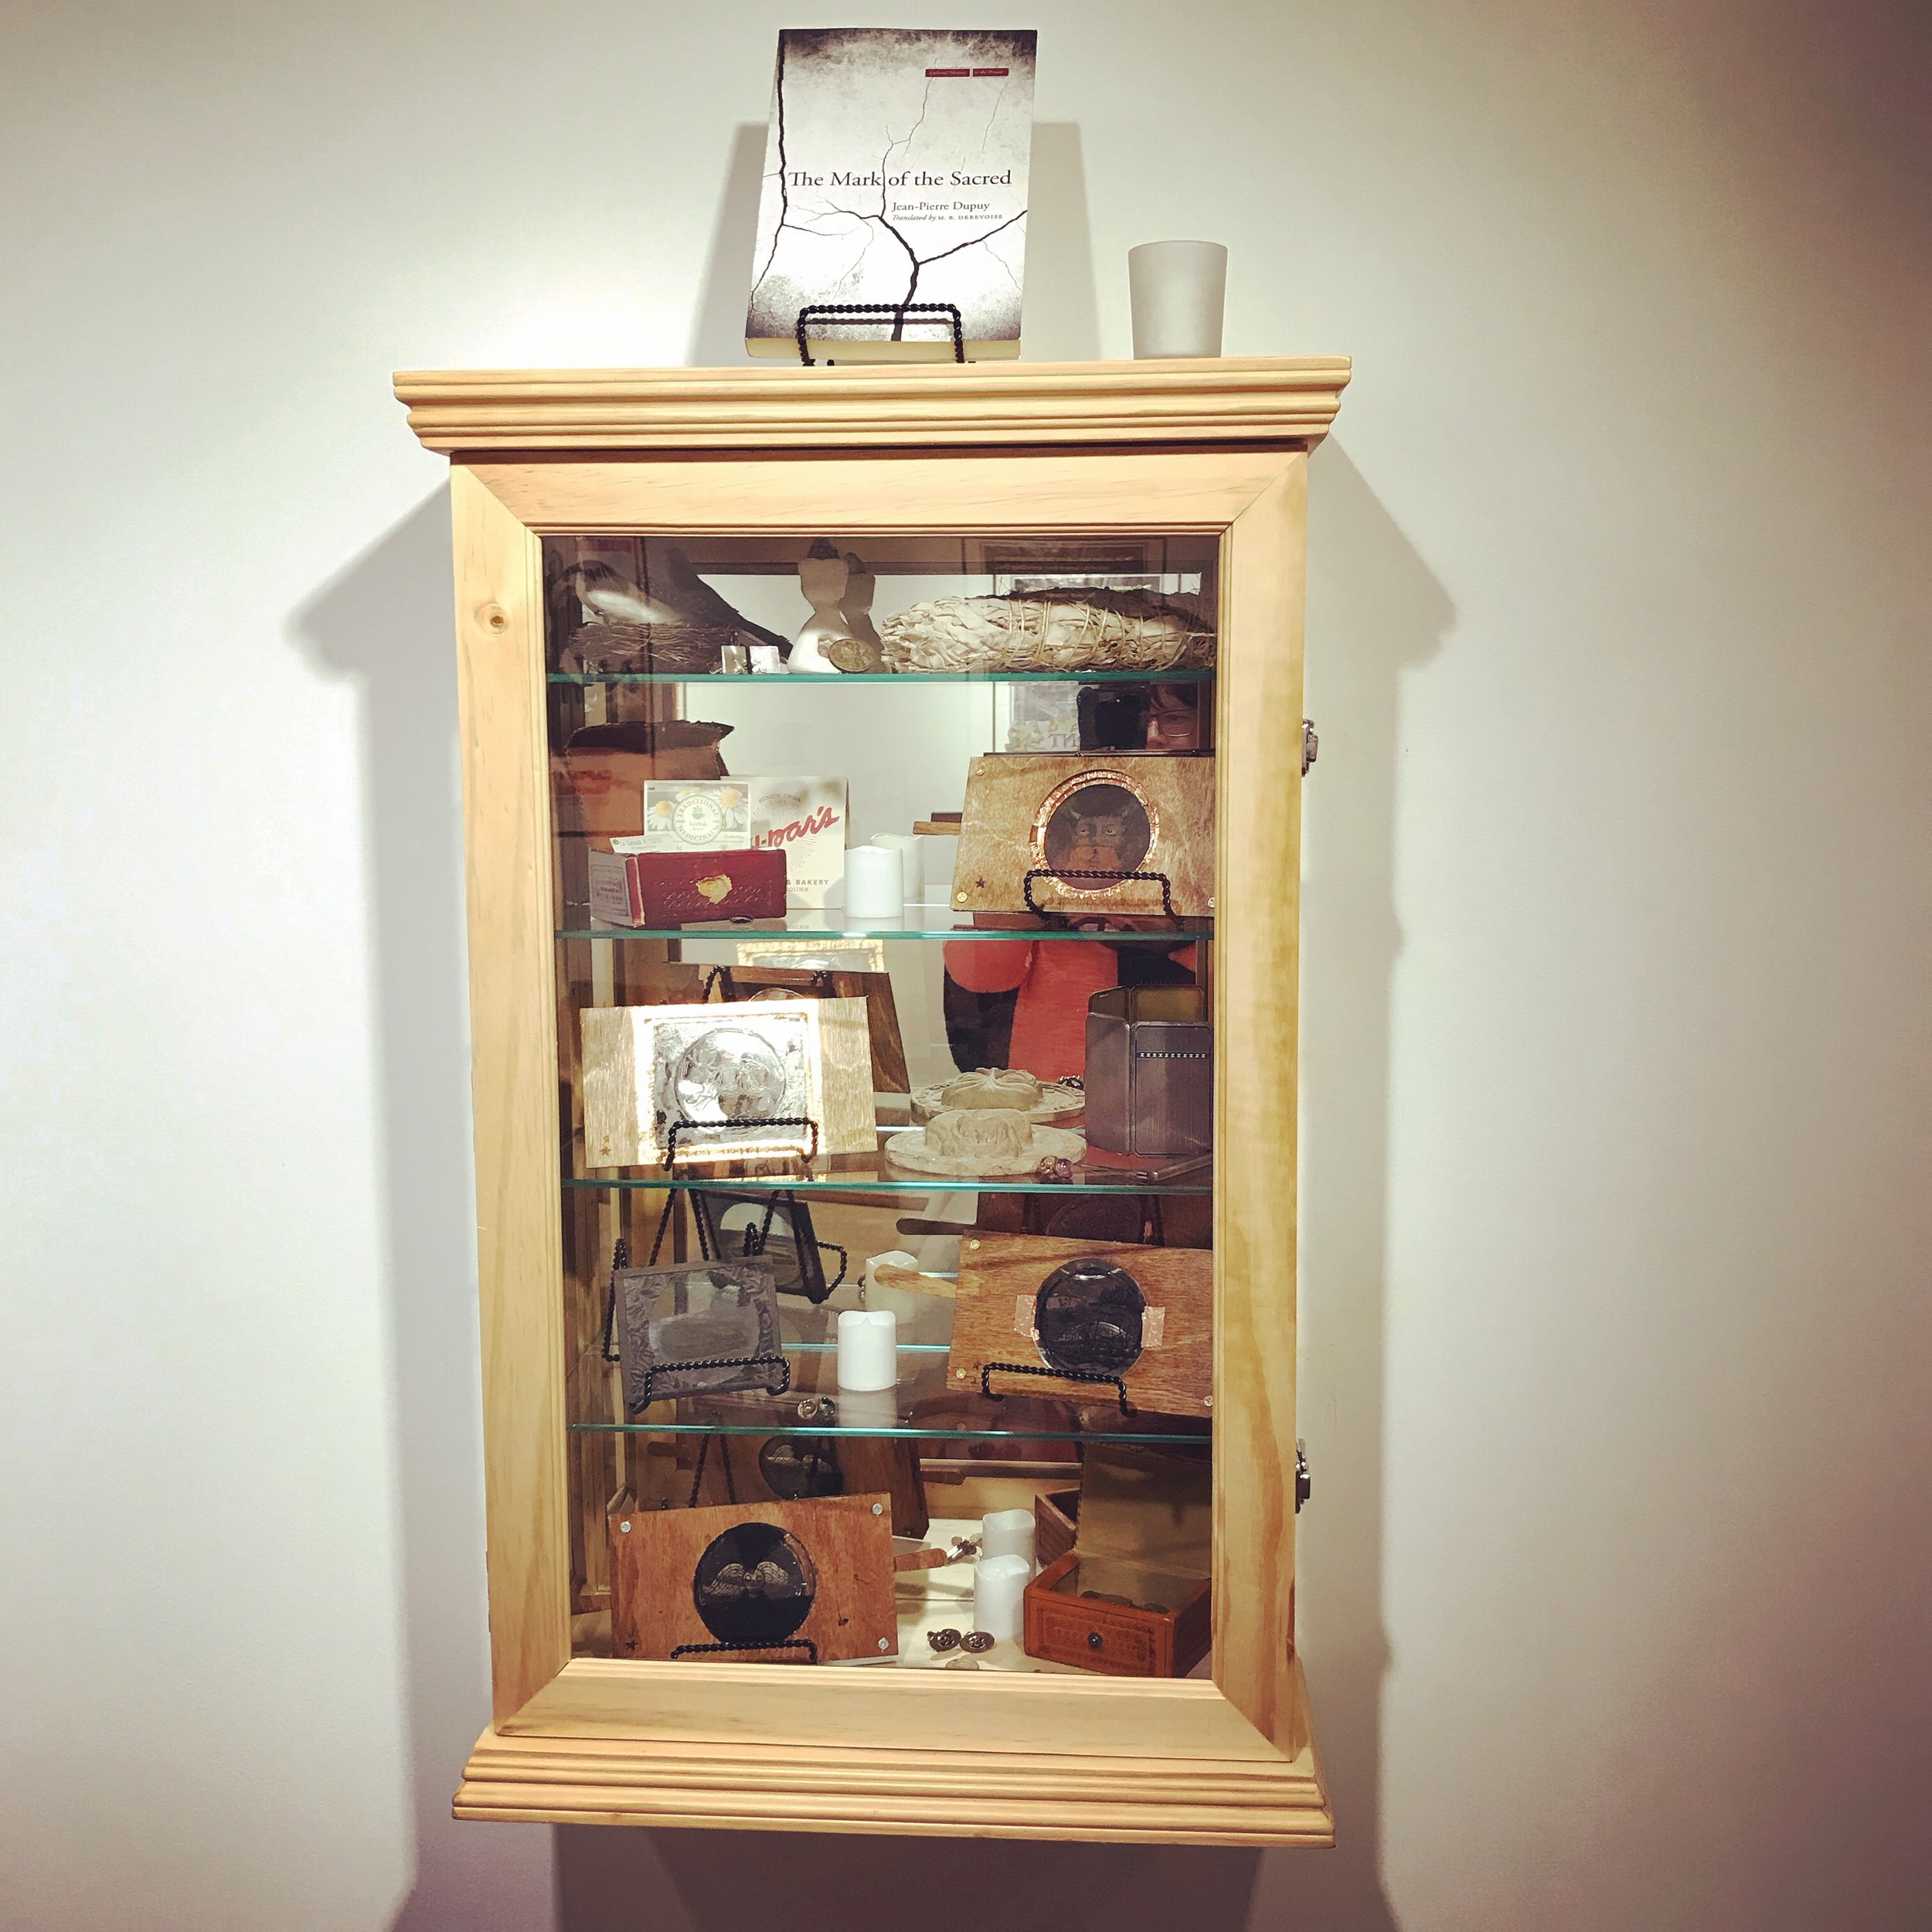 Curio cabinet; haunted objects